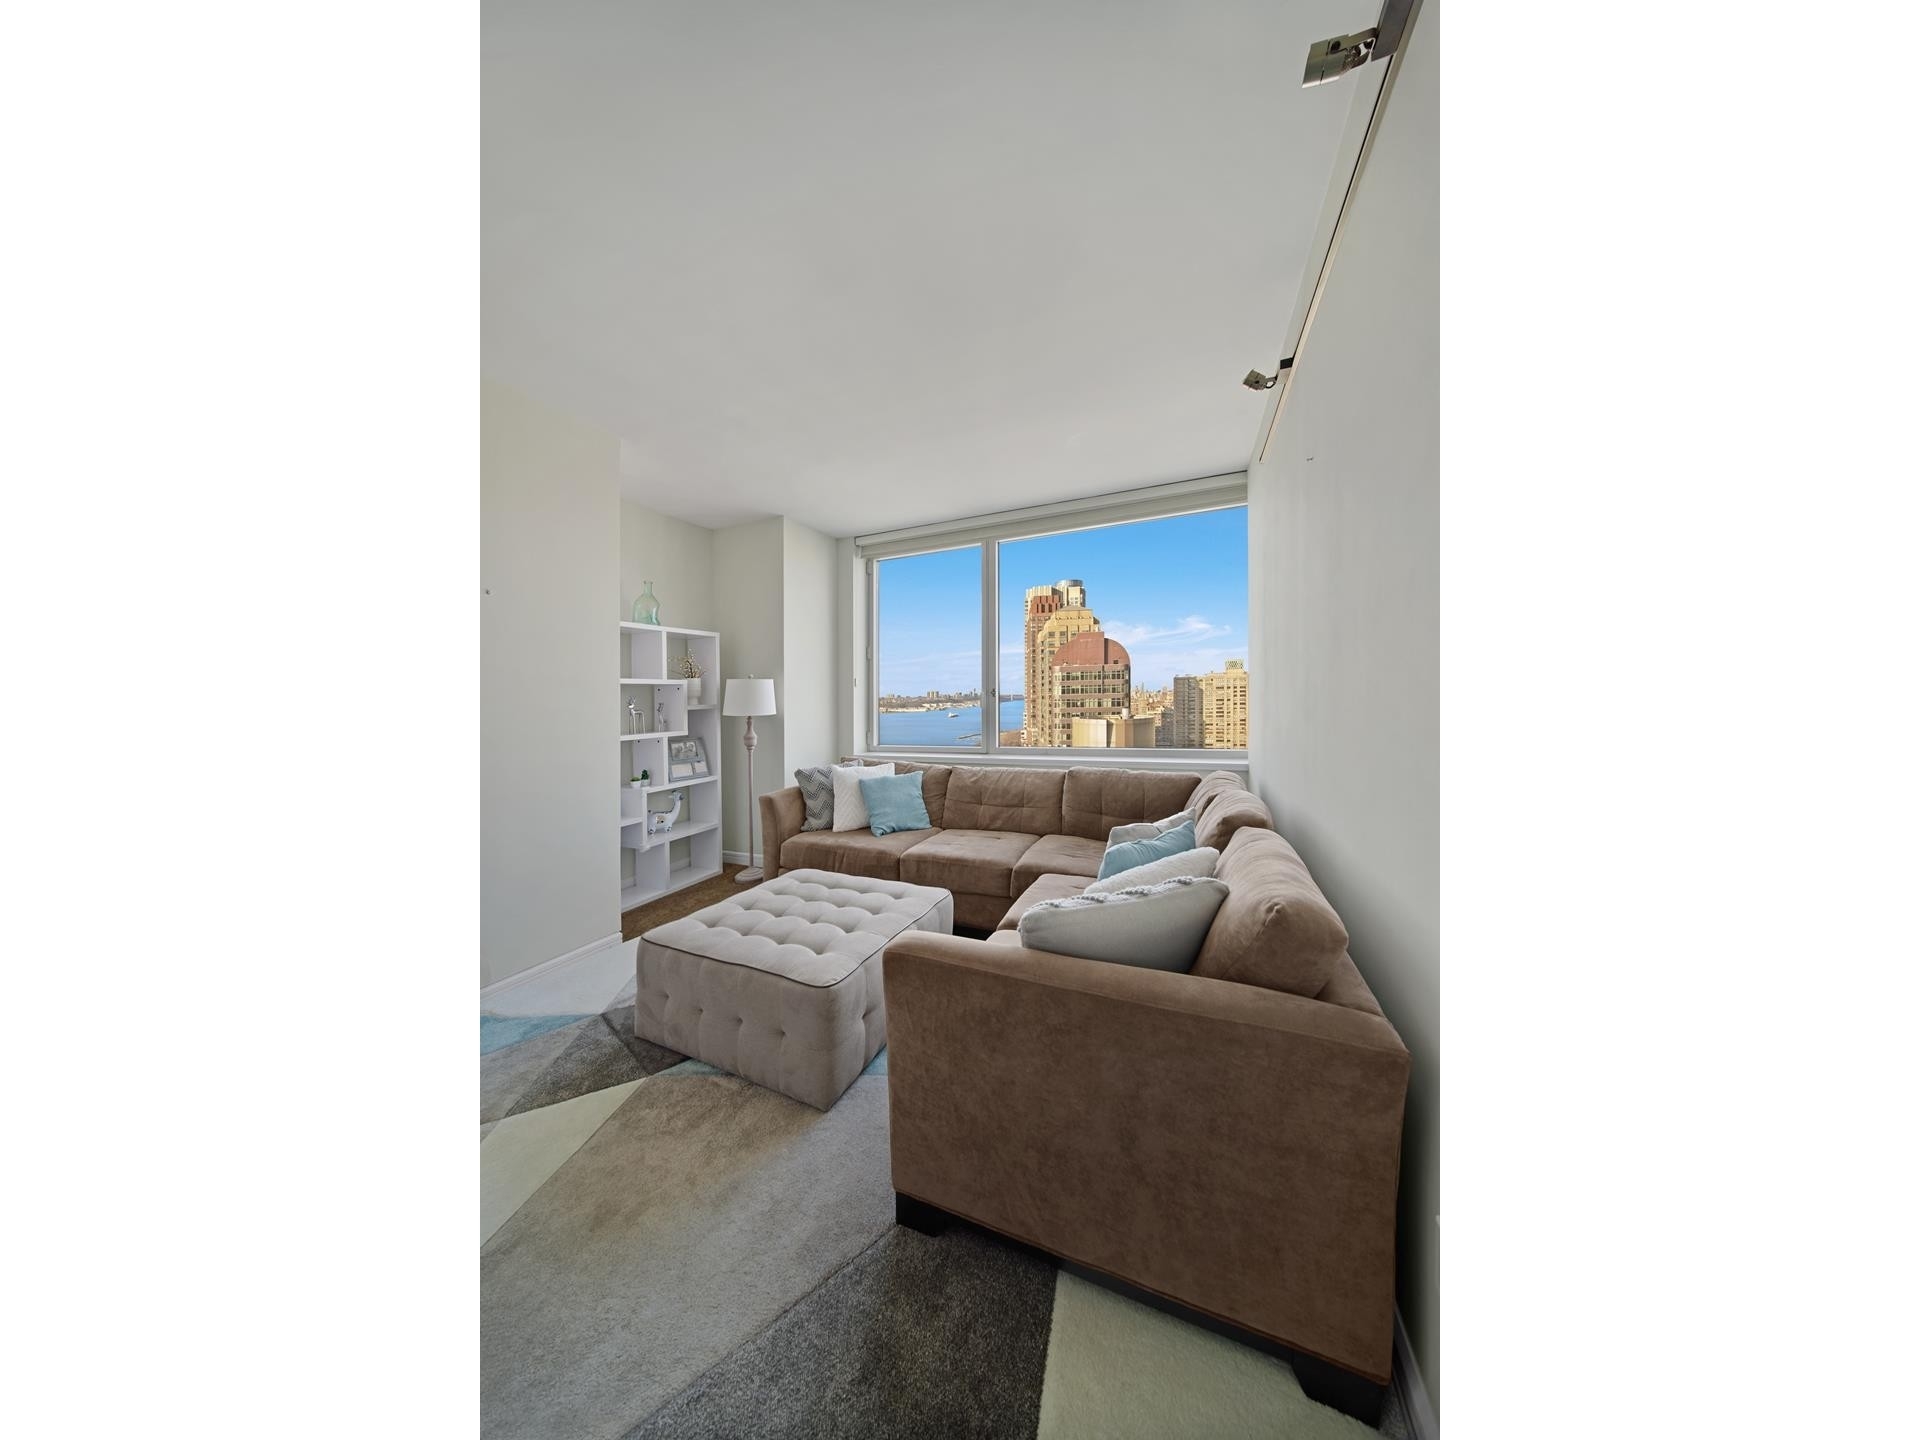 16. Condominiums for Sale at The Avery, 100 RIVERSIDE BLVD, 26THFLOOR Lincoln Square, New York, New York 10069